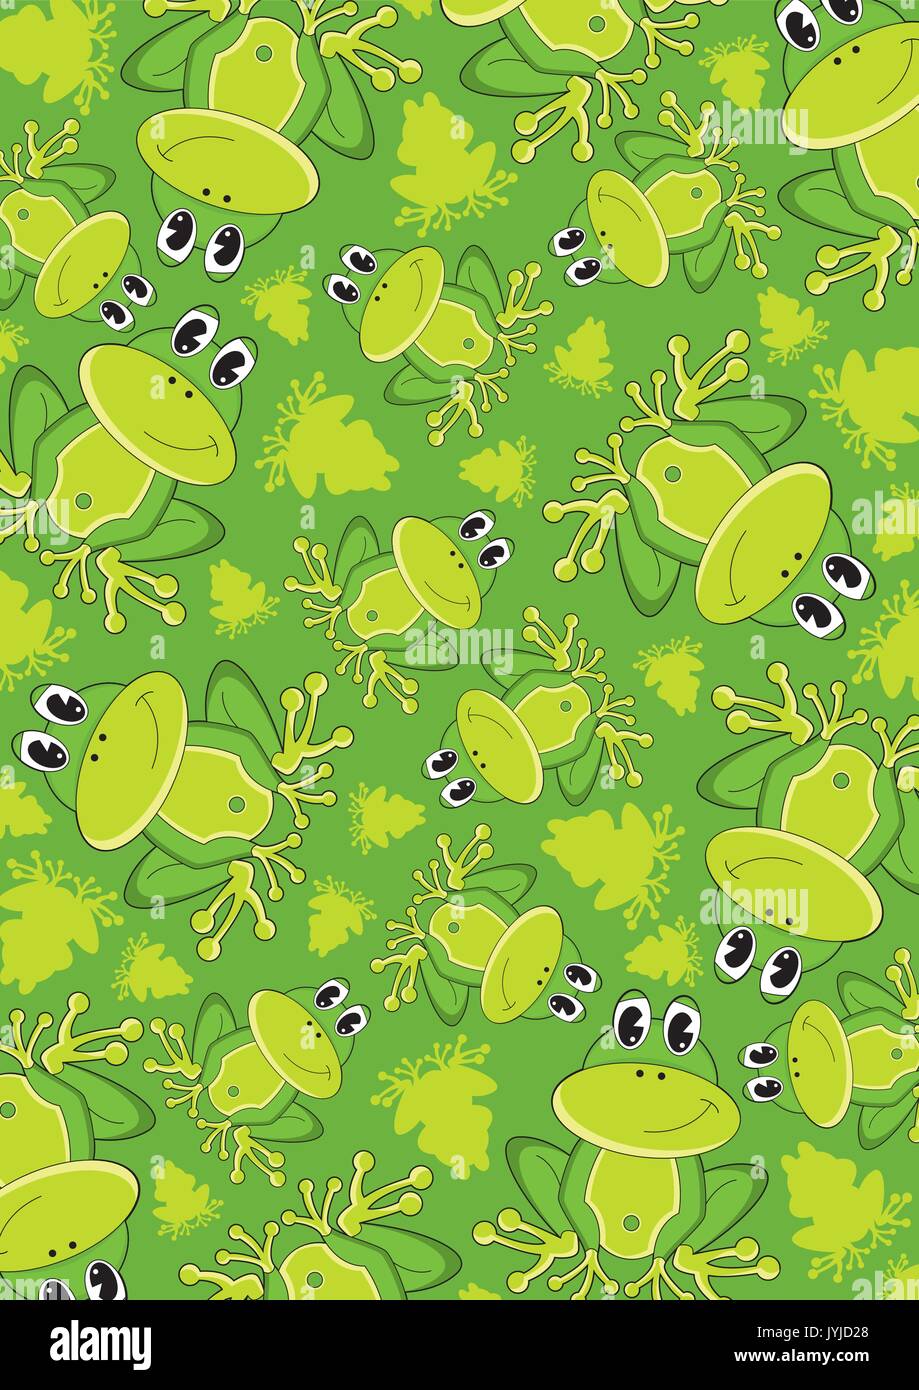 Cute Frog Background Images HD Pictures and Wallpaper For Free Download   Pngtree